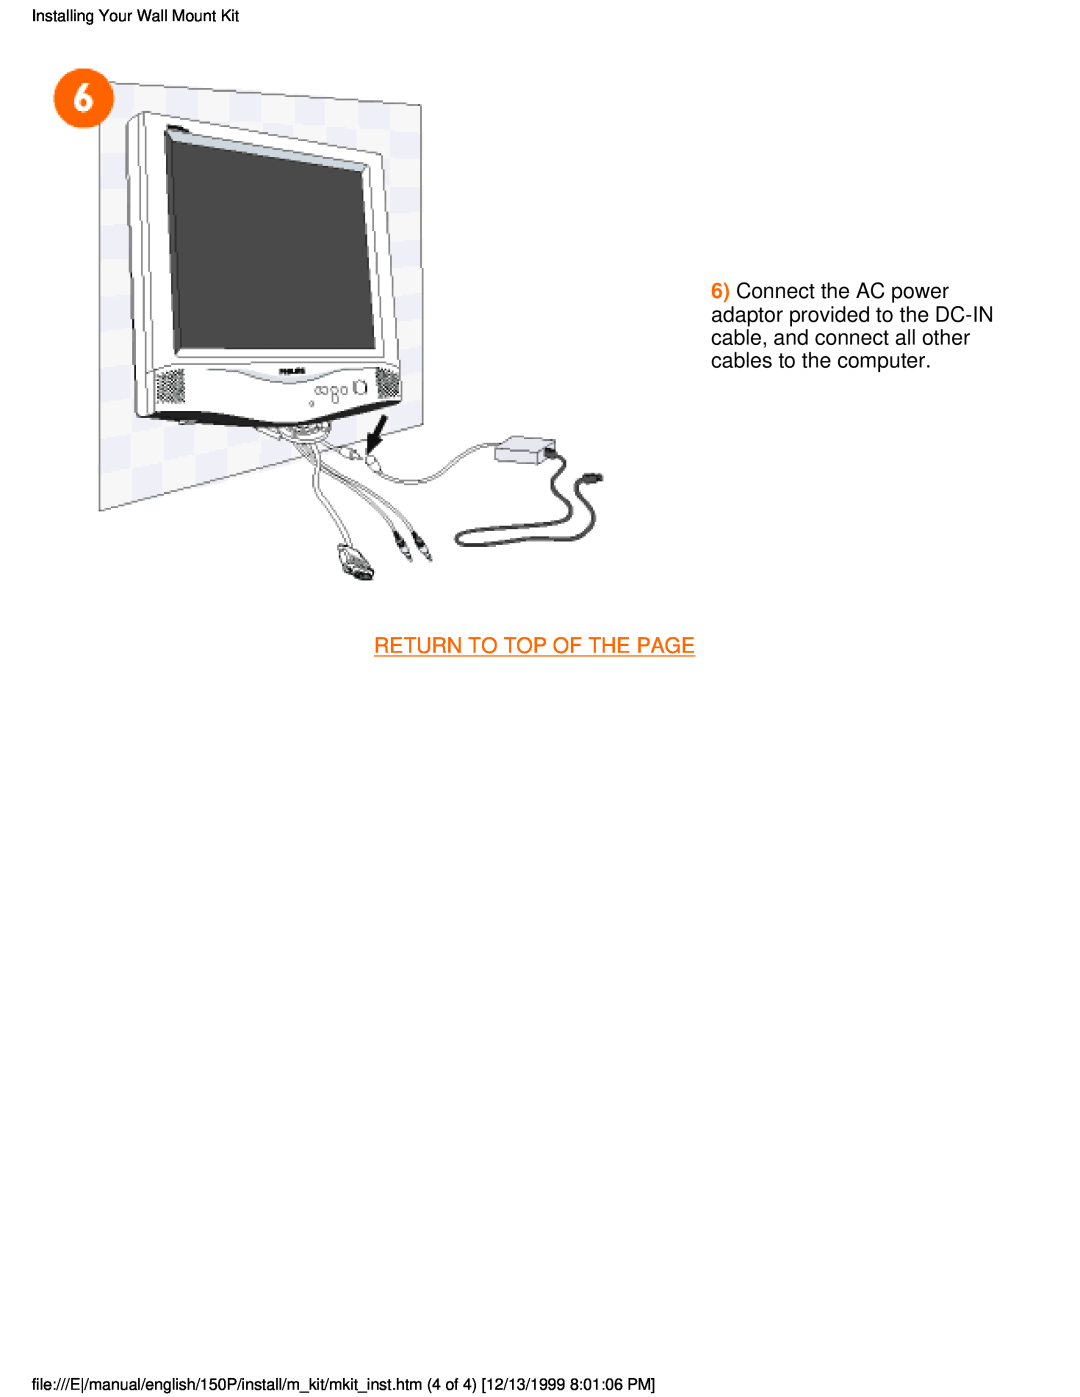 Philips 150P user manual Return To Top Of The Page, Installing Your Wall Mount Kit 